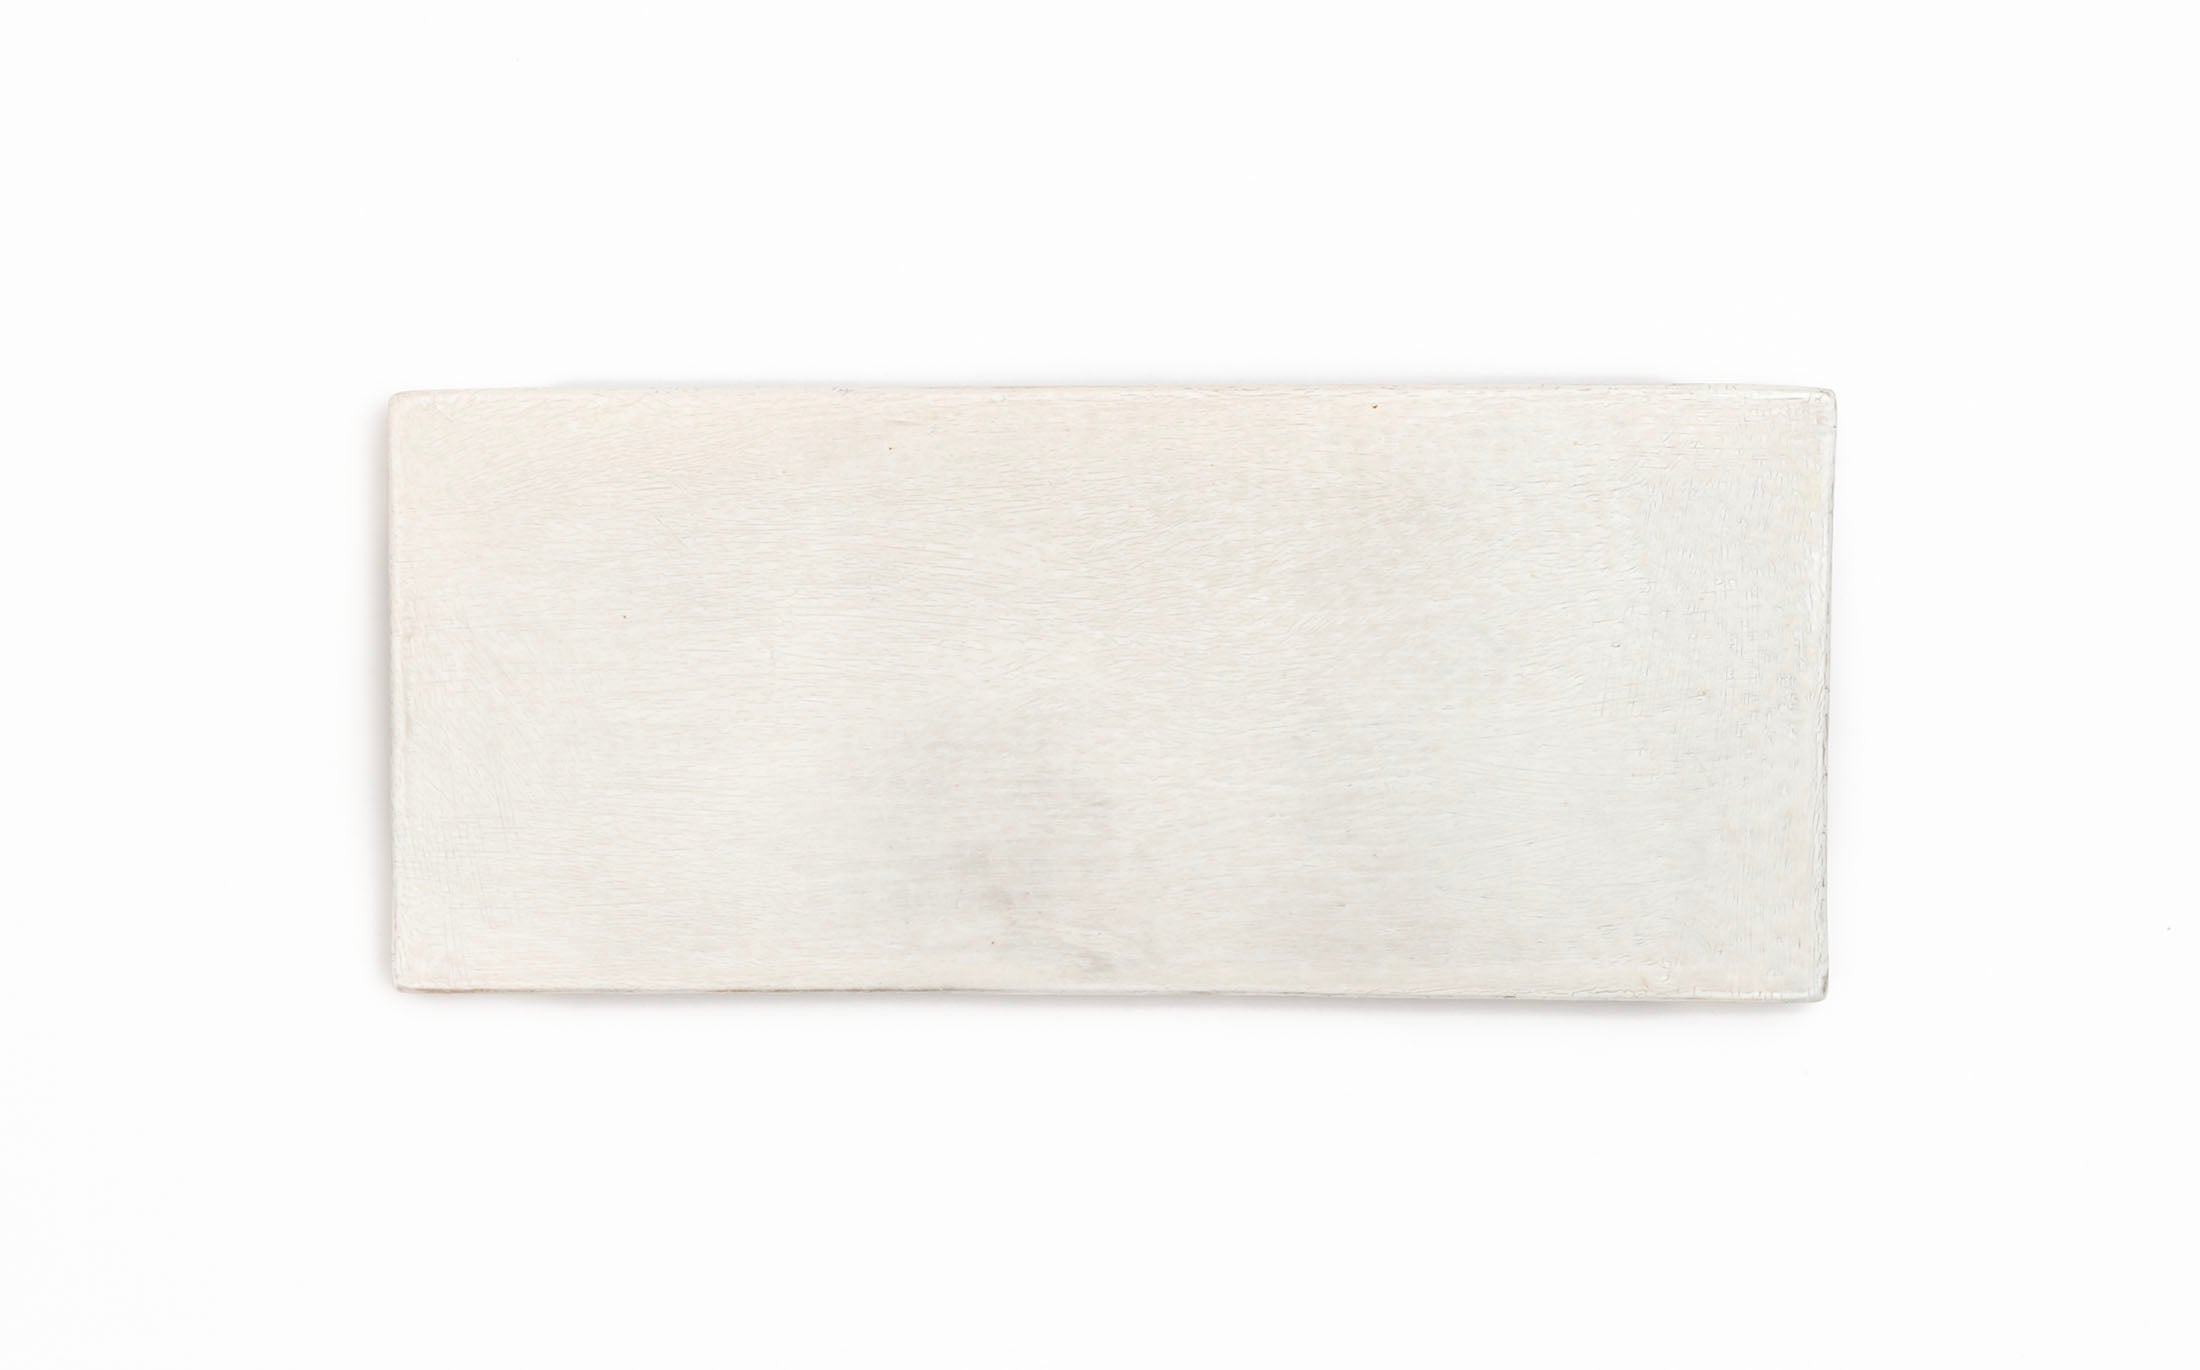 Kasama - Ceramic White - Rectangle Long Plate with Legs